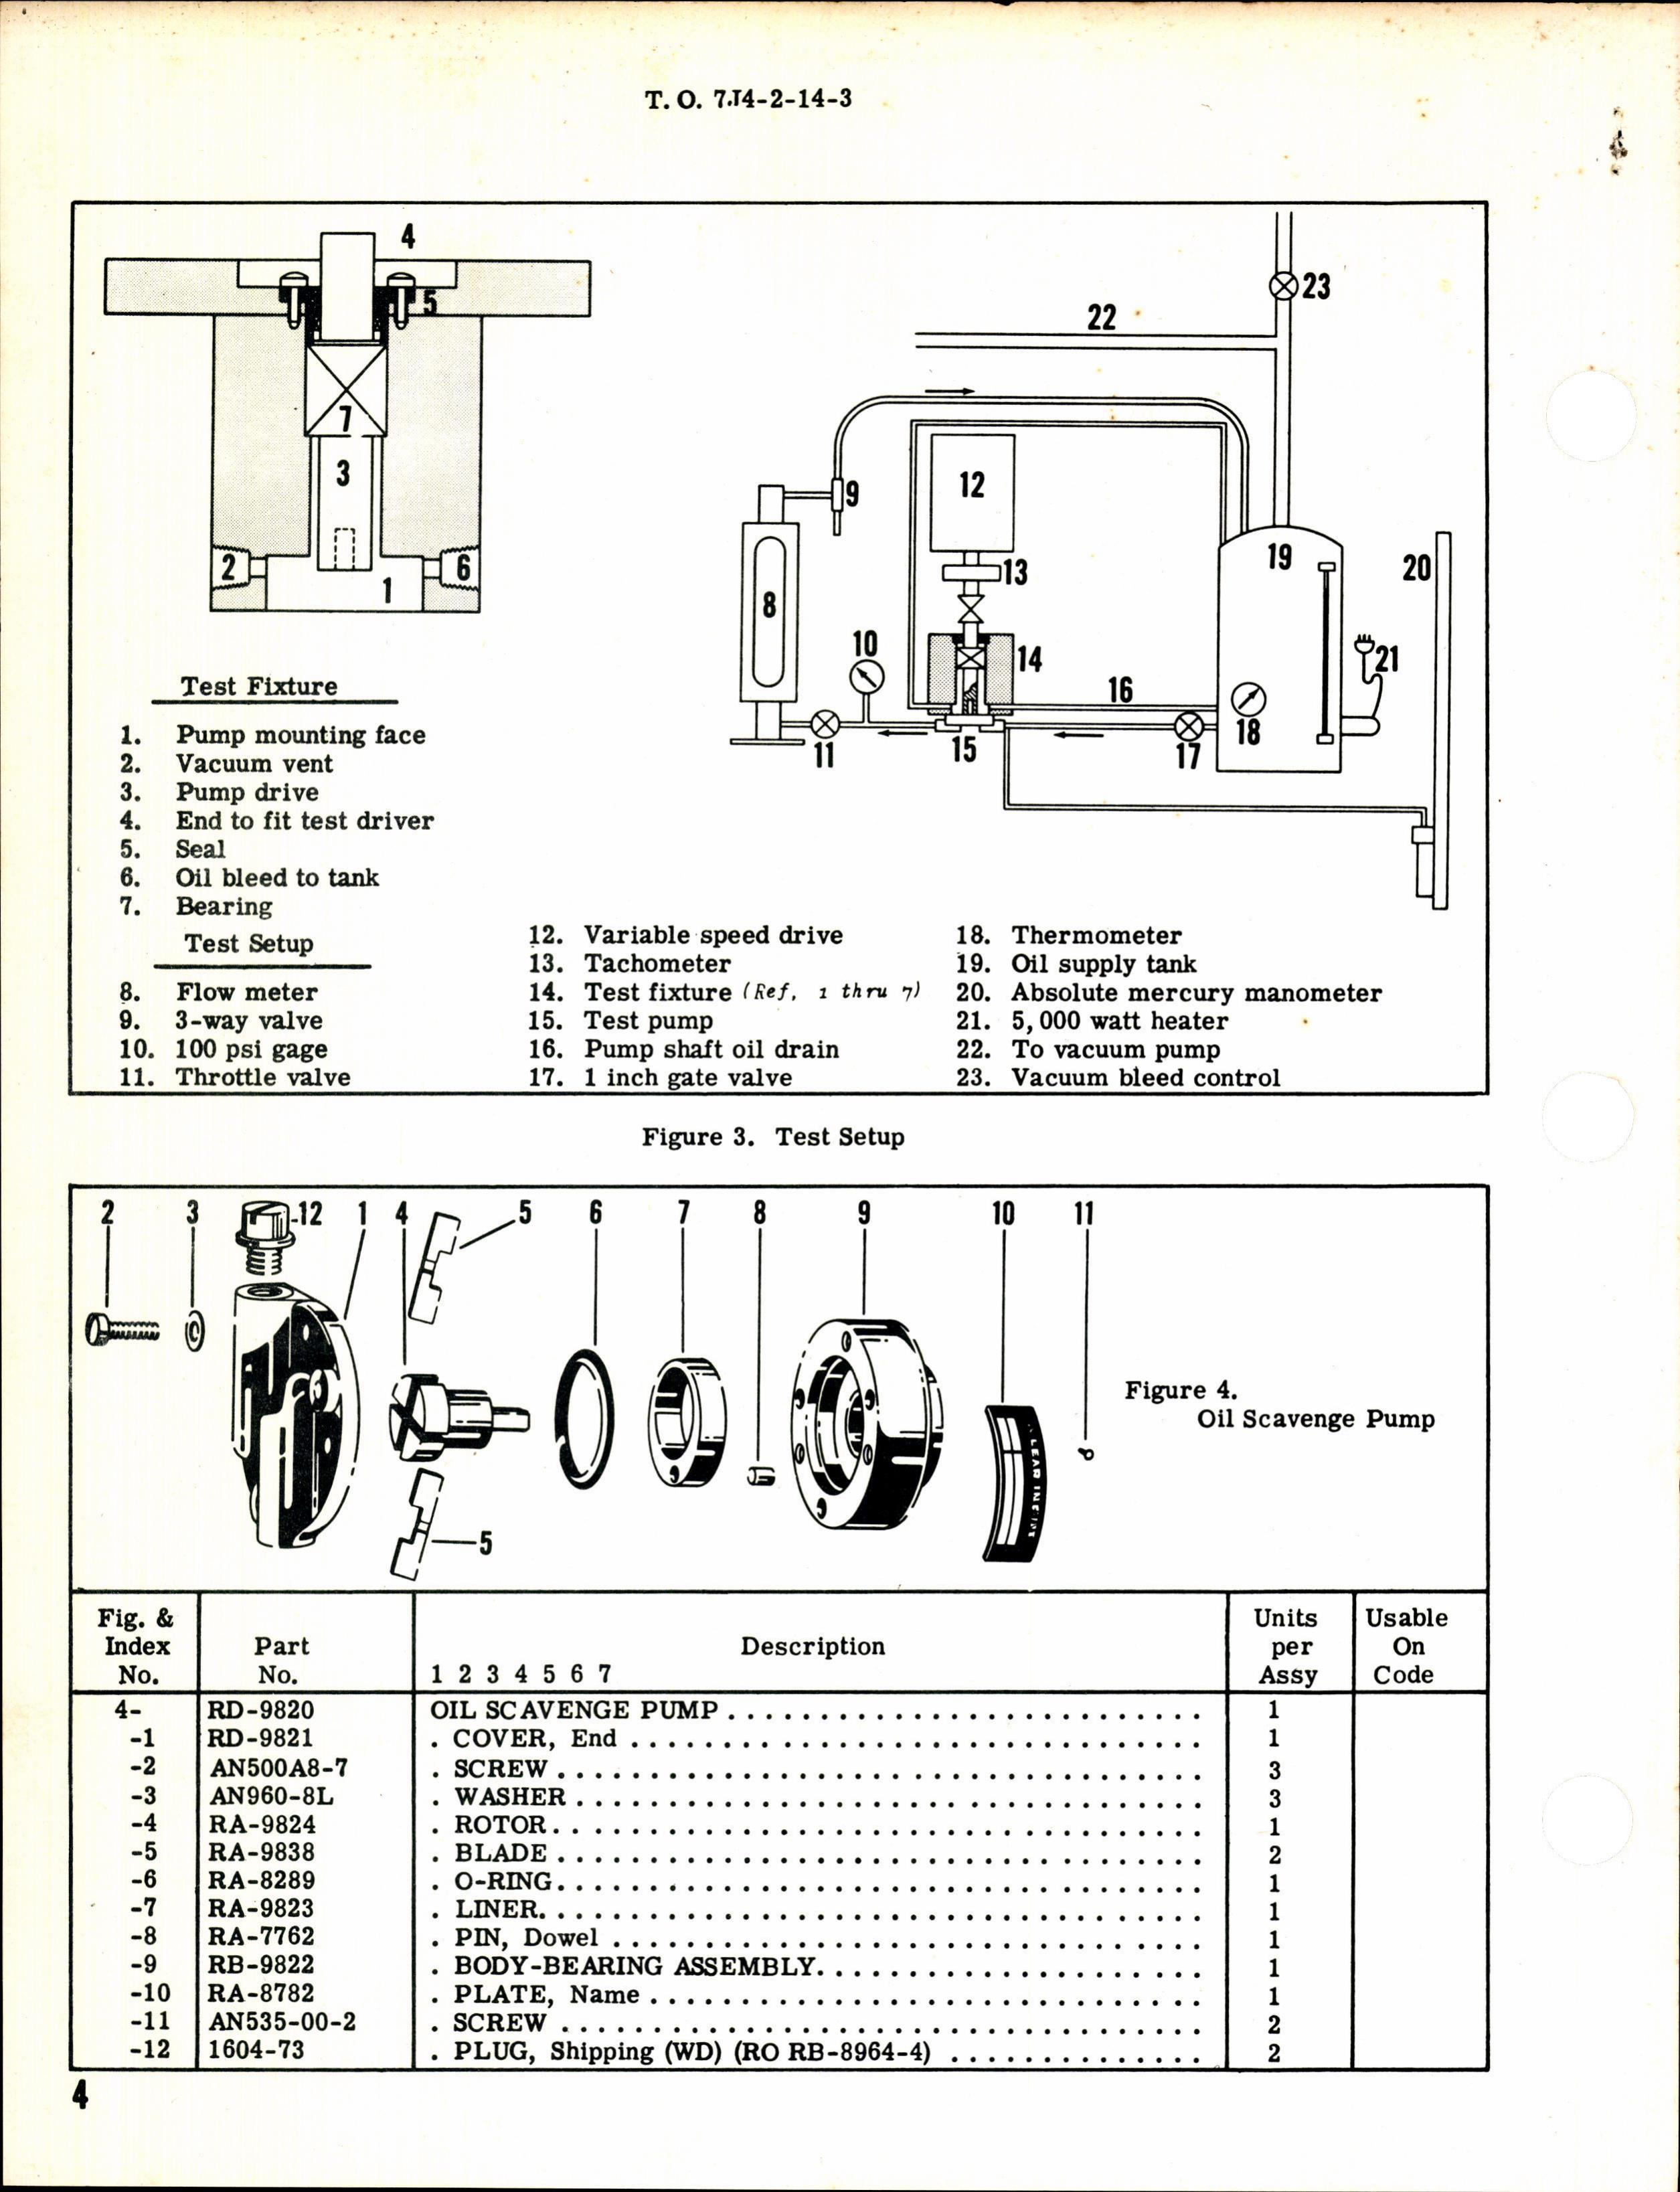 Sample page 4 from AirCorps Library document: Overhaul Instructions with Parts Breakdown for Oil Scavenge Pump Model RD-9820